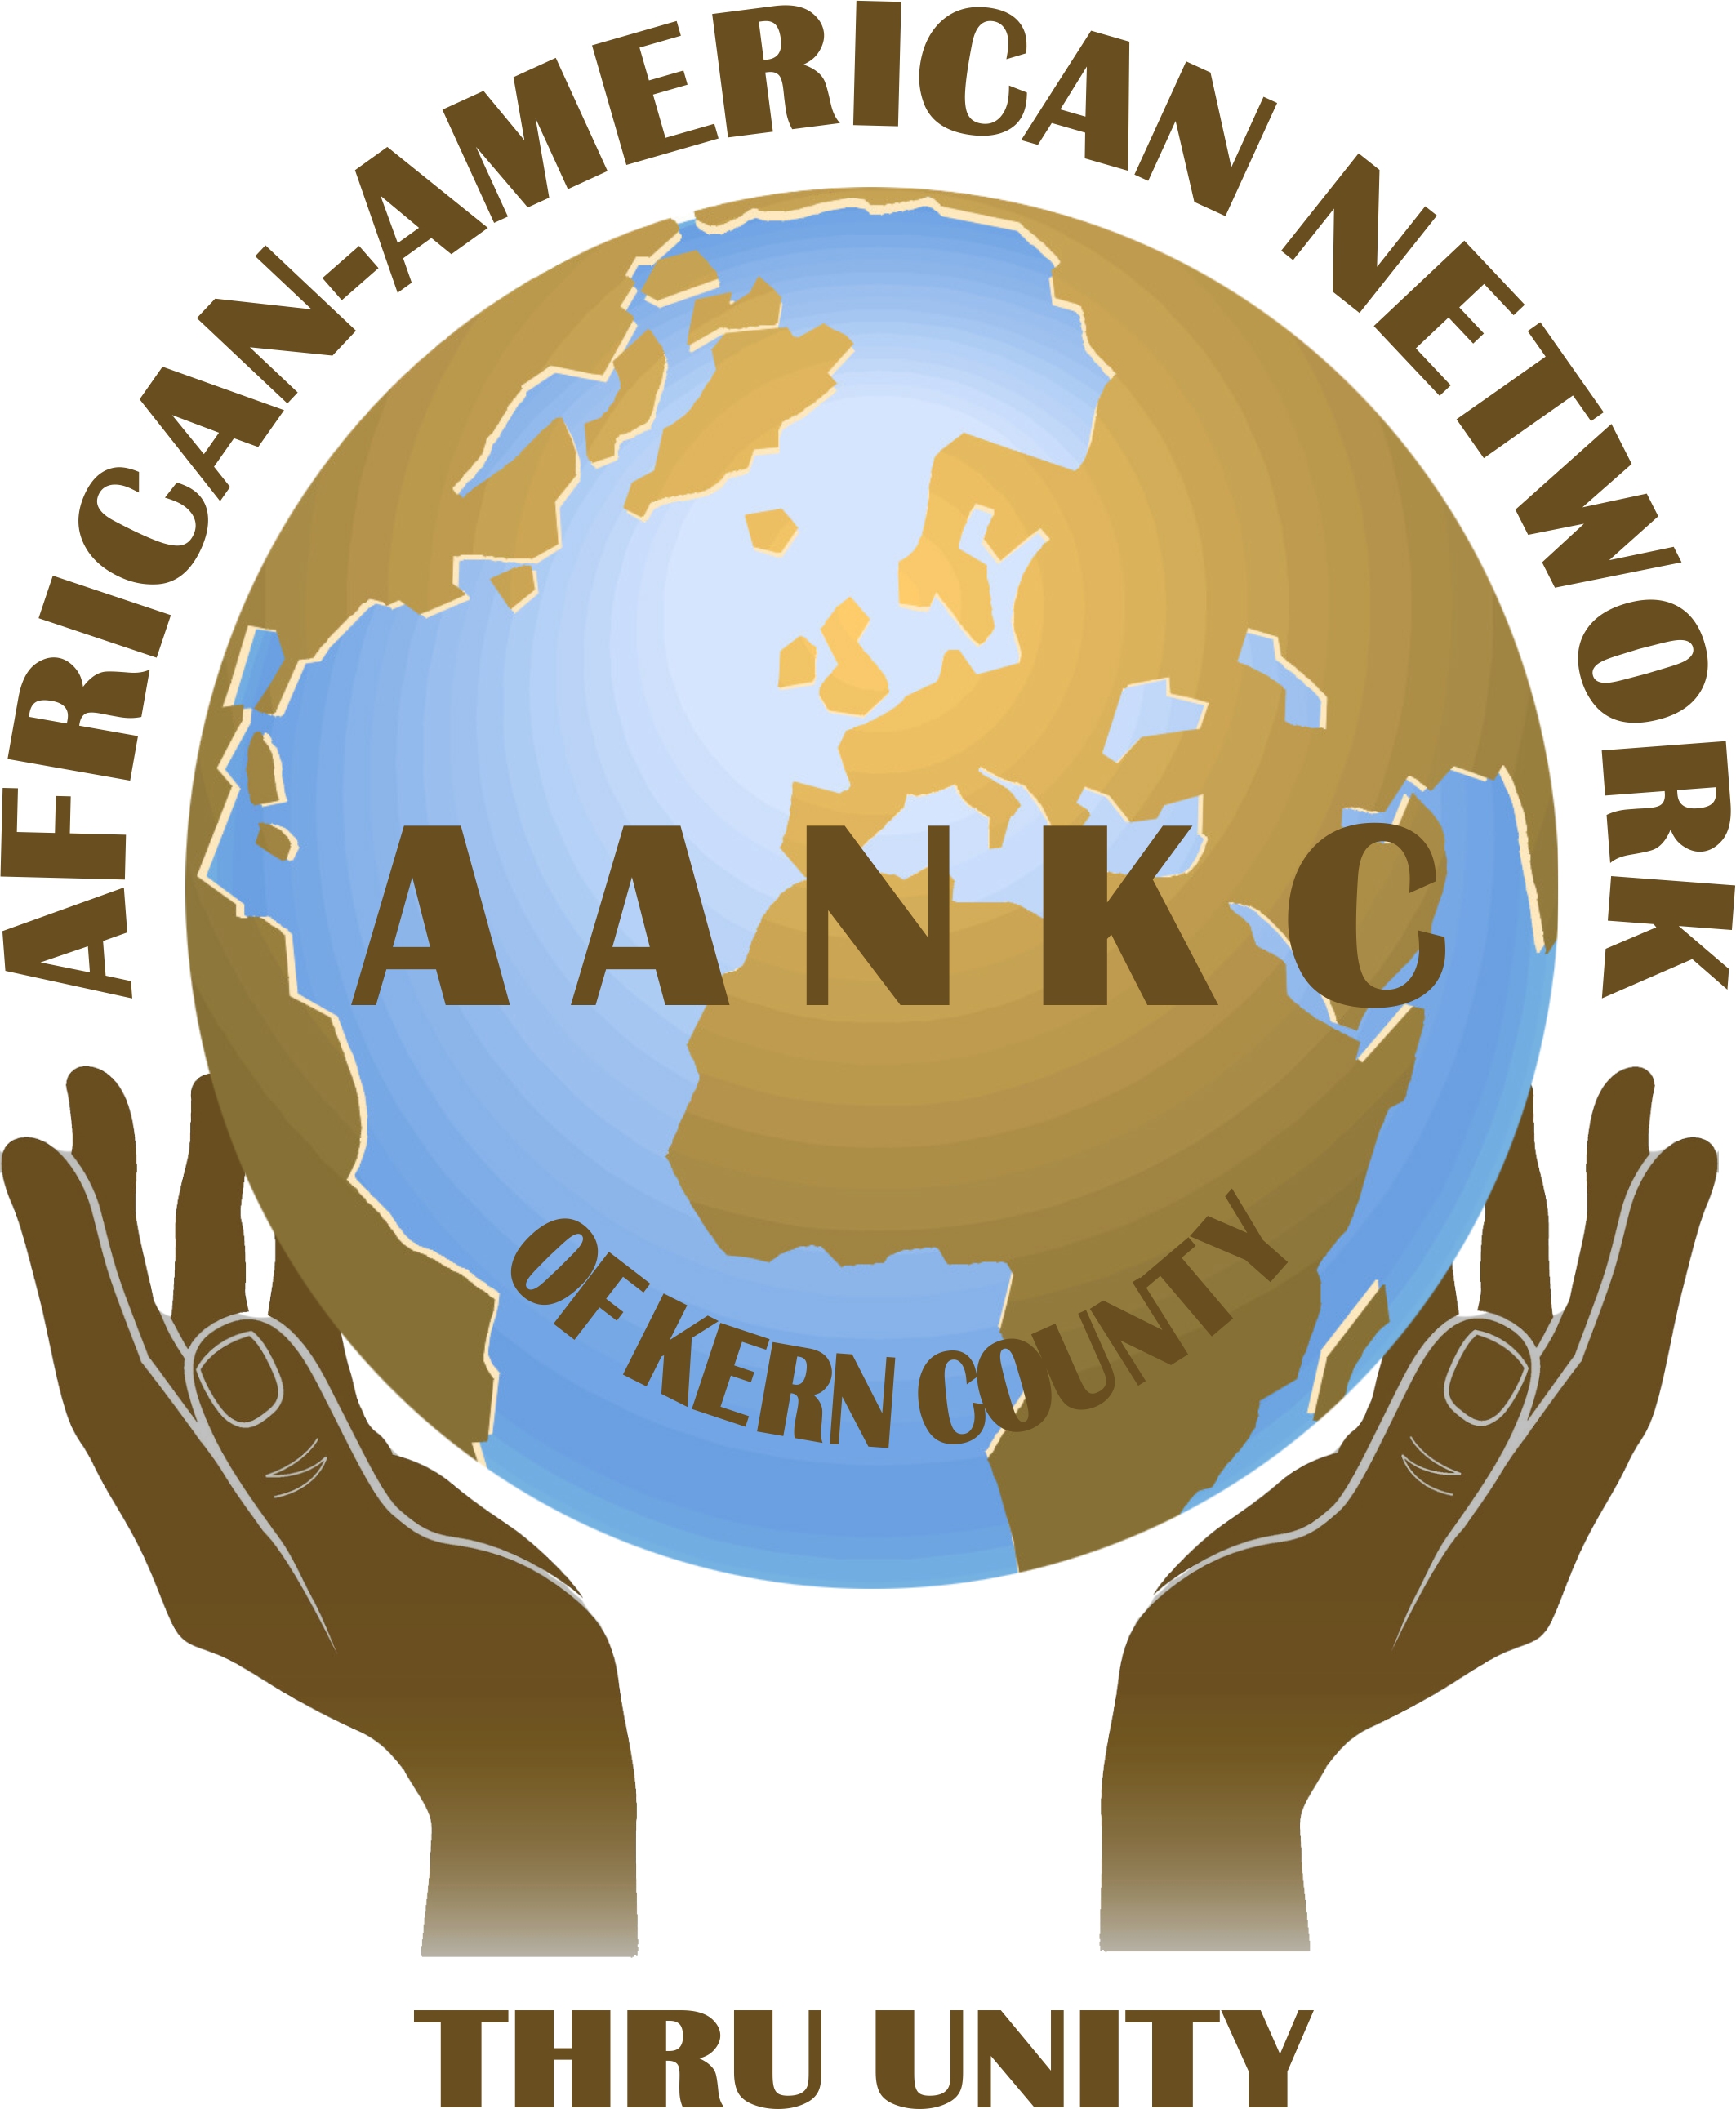 African American Network of Kern County